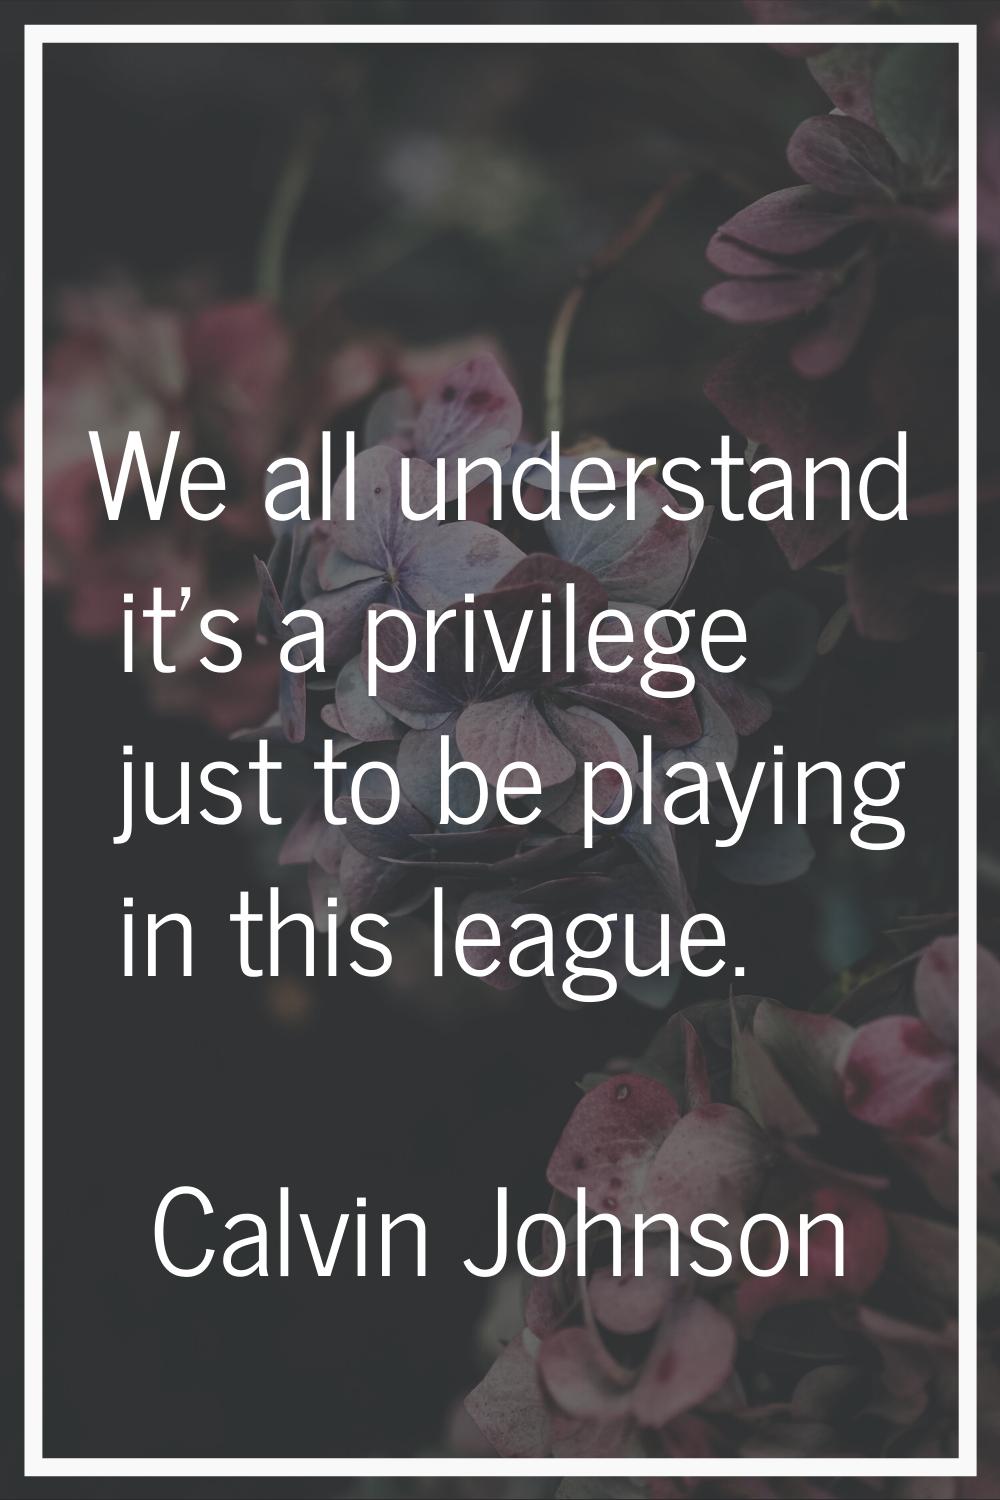 We all understand it's a privilege just to be playing in this league.